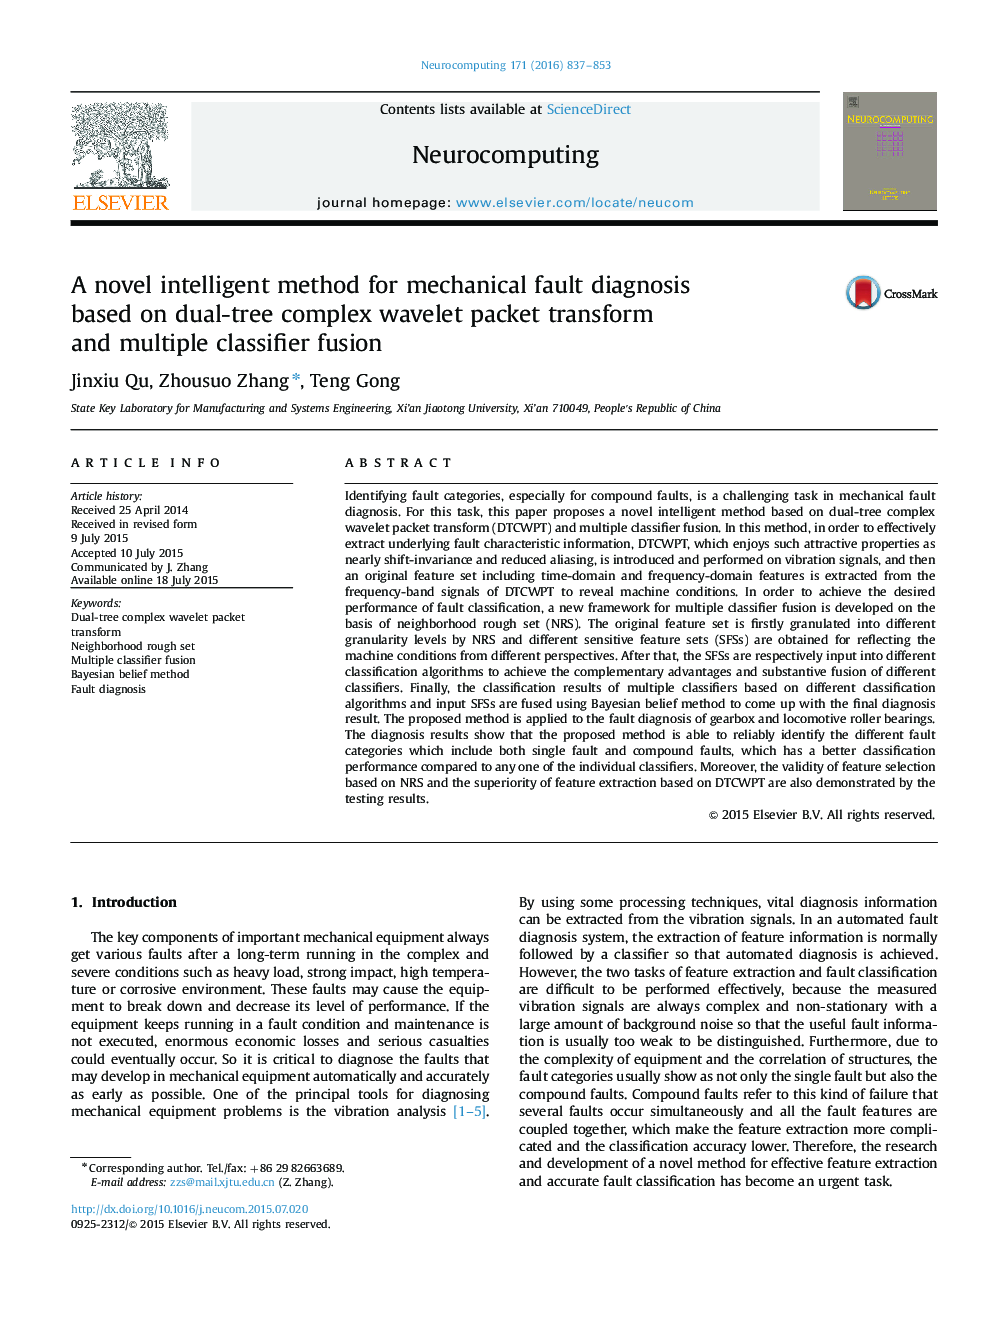 A novel intelligent method for mechanical fault diagnosis based on dual-tree complex wavelet packet transform and multiple classifier fusion